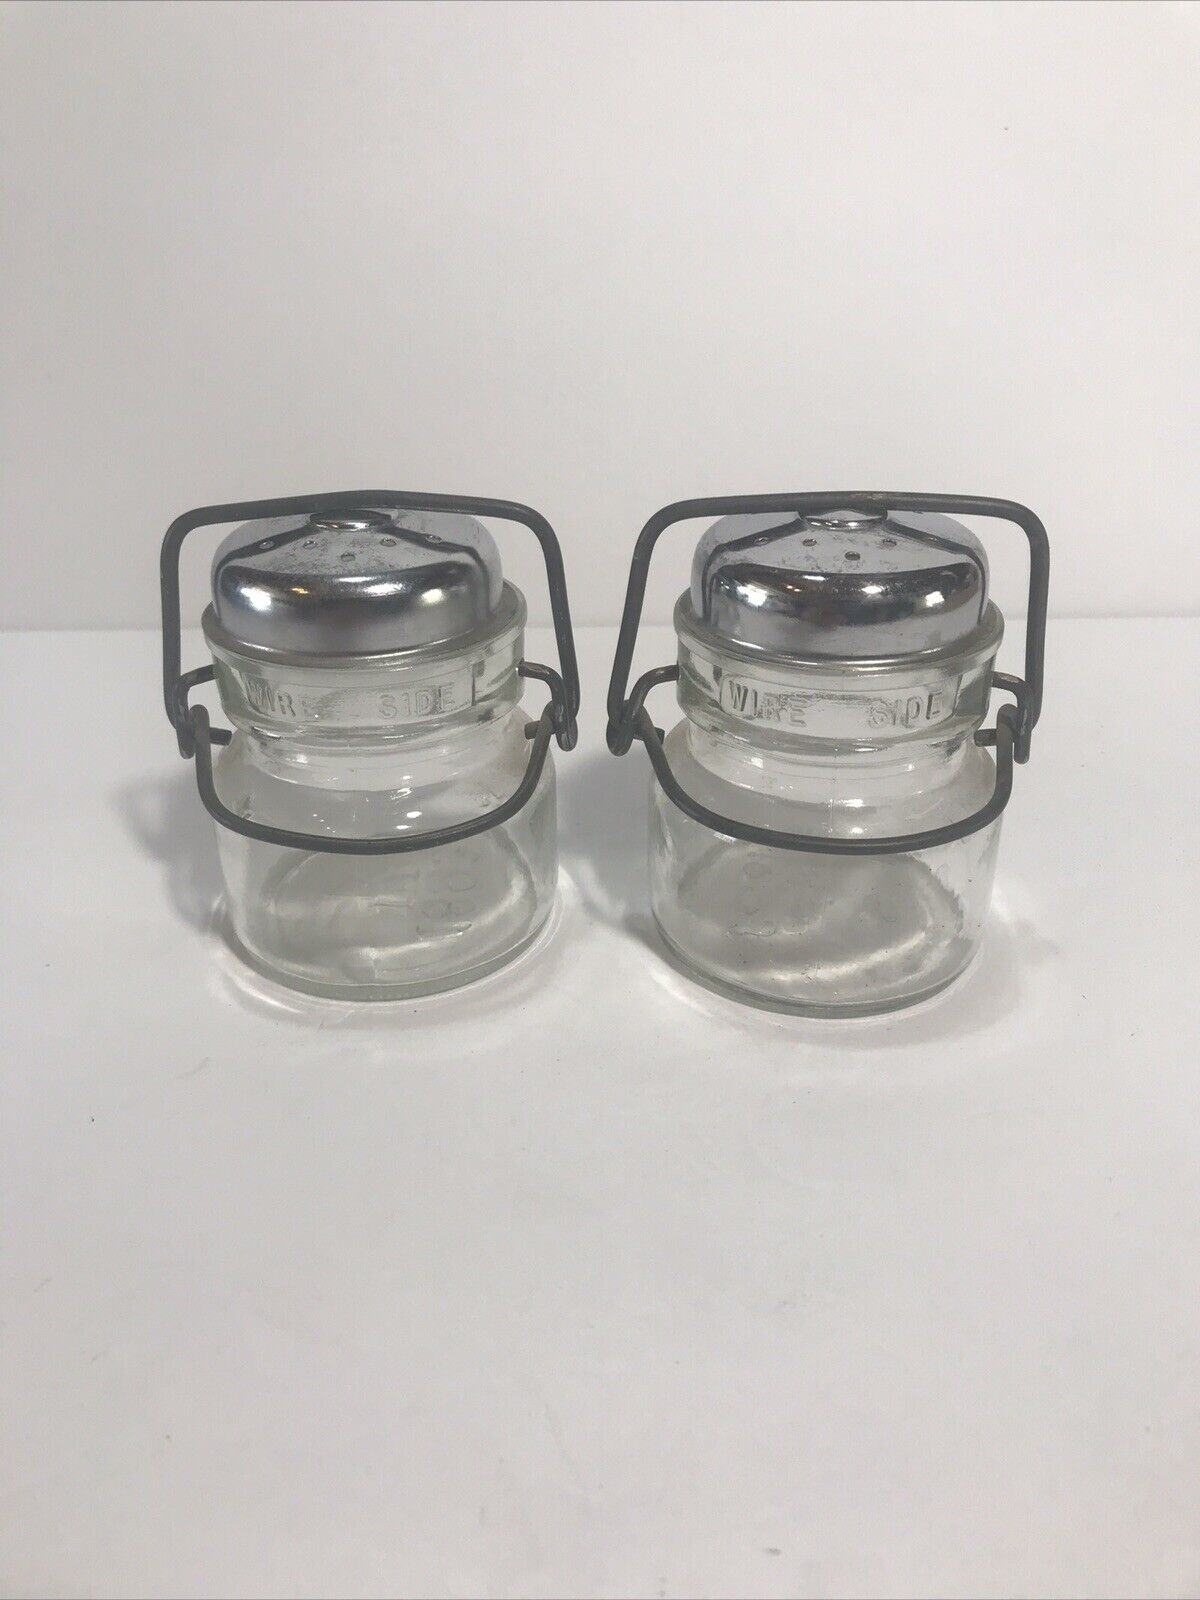 Vintage 1893 FP Bail Wire Lid Clear Glass Salt and Pepper Shaker Set 3.5”